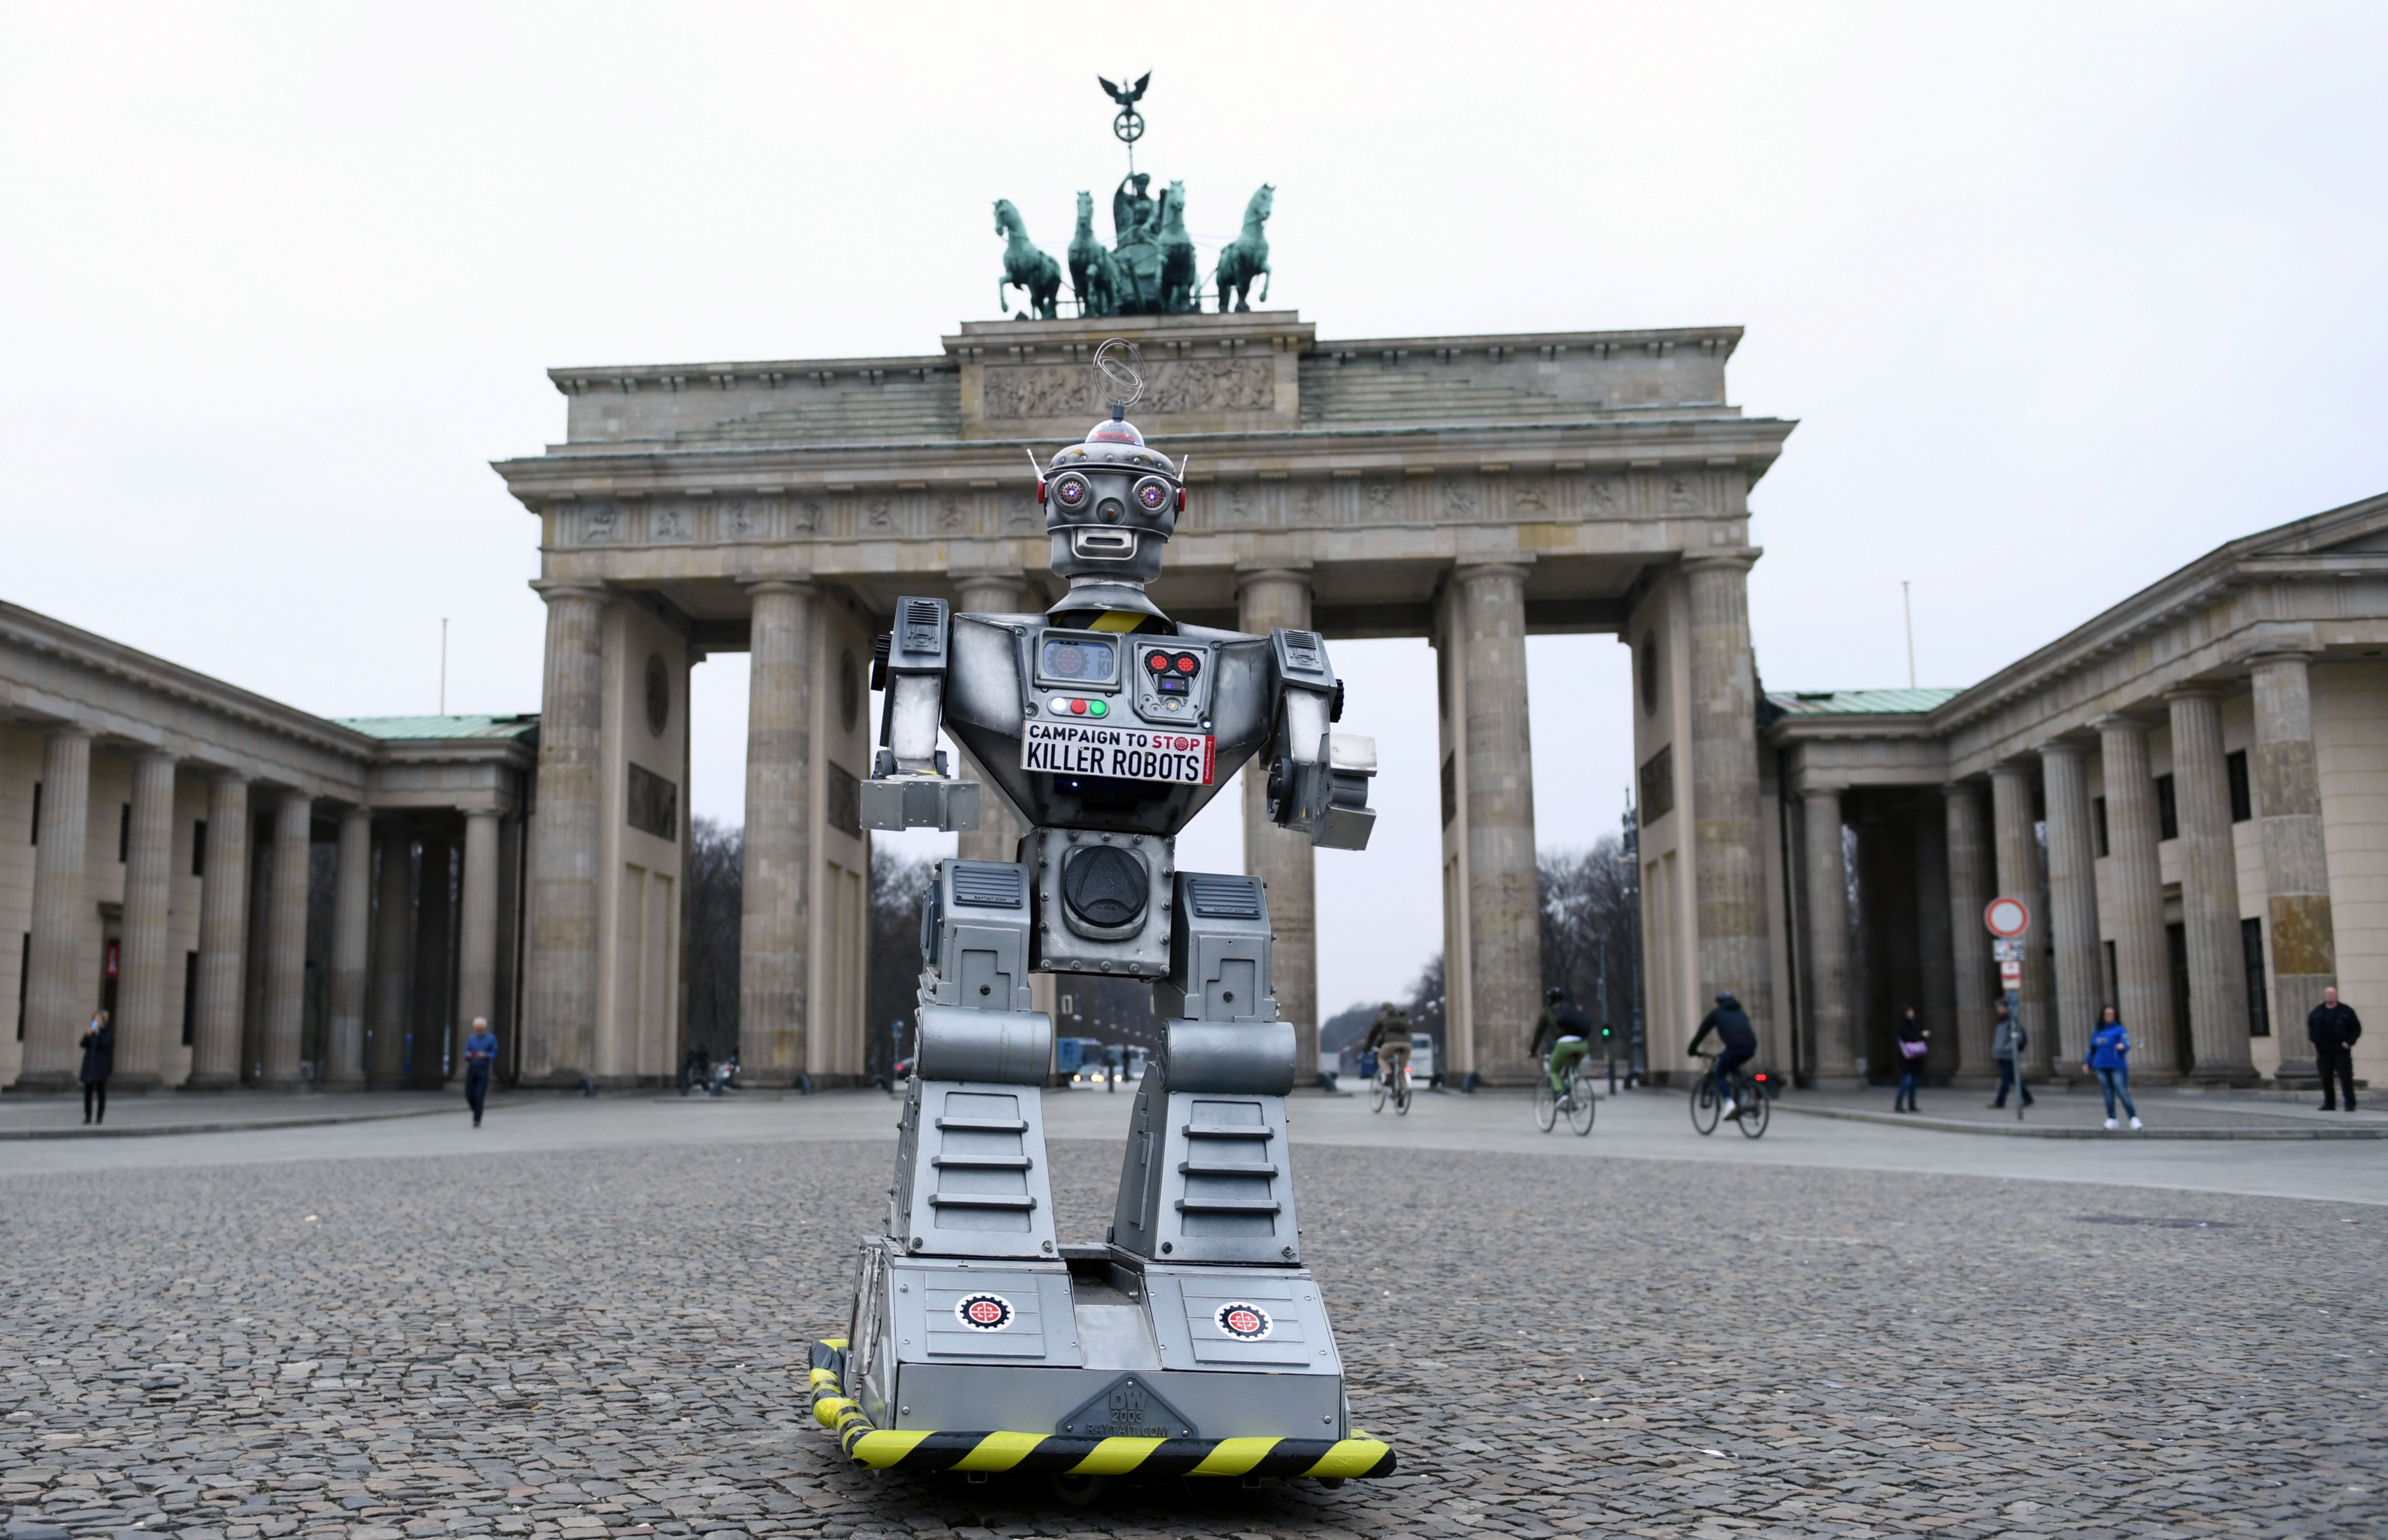 A robot is pictured as activists from the Campaign to Stop Killer Robots, a coalition of non-governmental organisations opposing lethal autonomous weapons or so-called 'killer robots', stage a protest at Brandenburg Gate in Berlin, Germany, March, 21, 2019. REUTERS/Annegret Hilse - RC1287E208A0